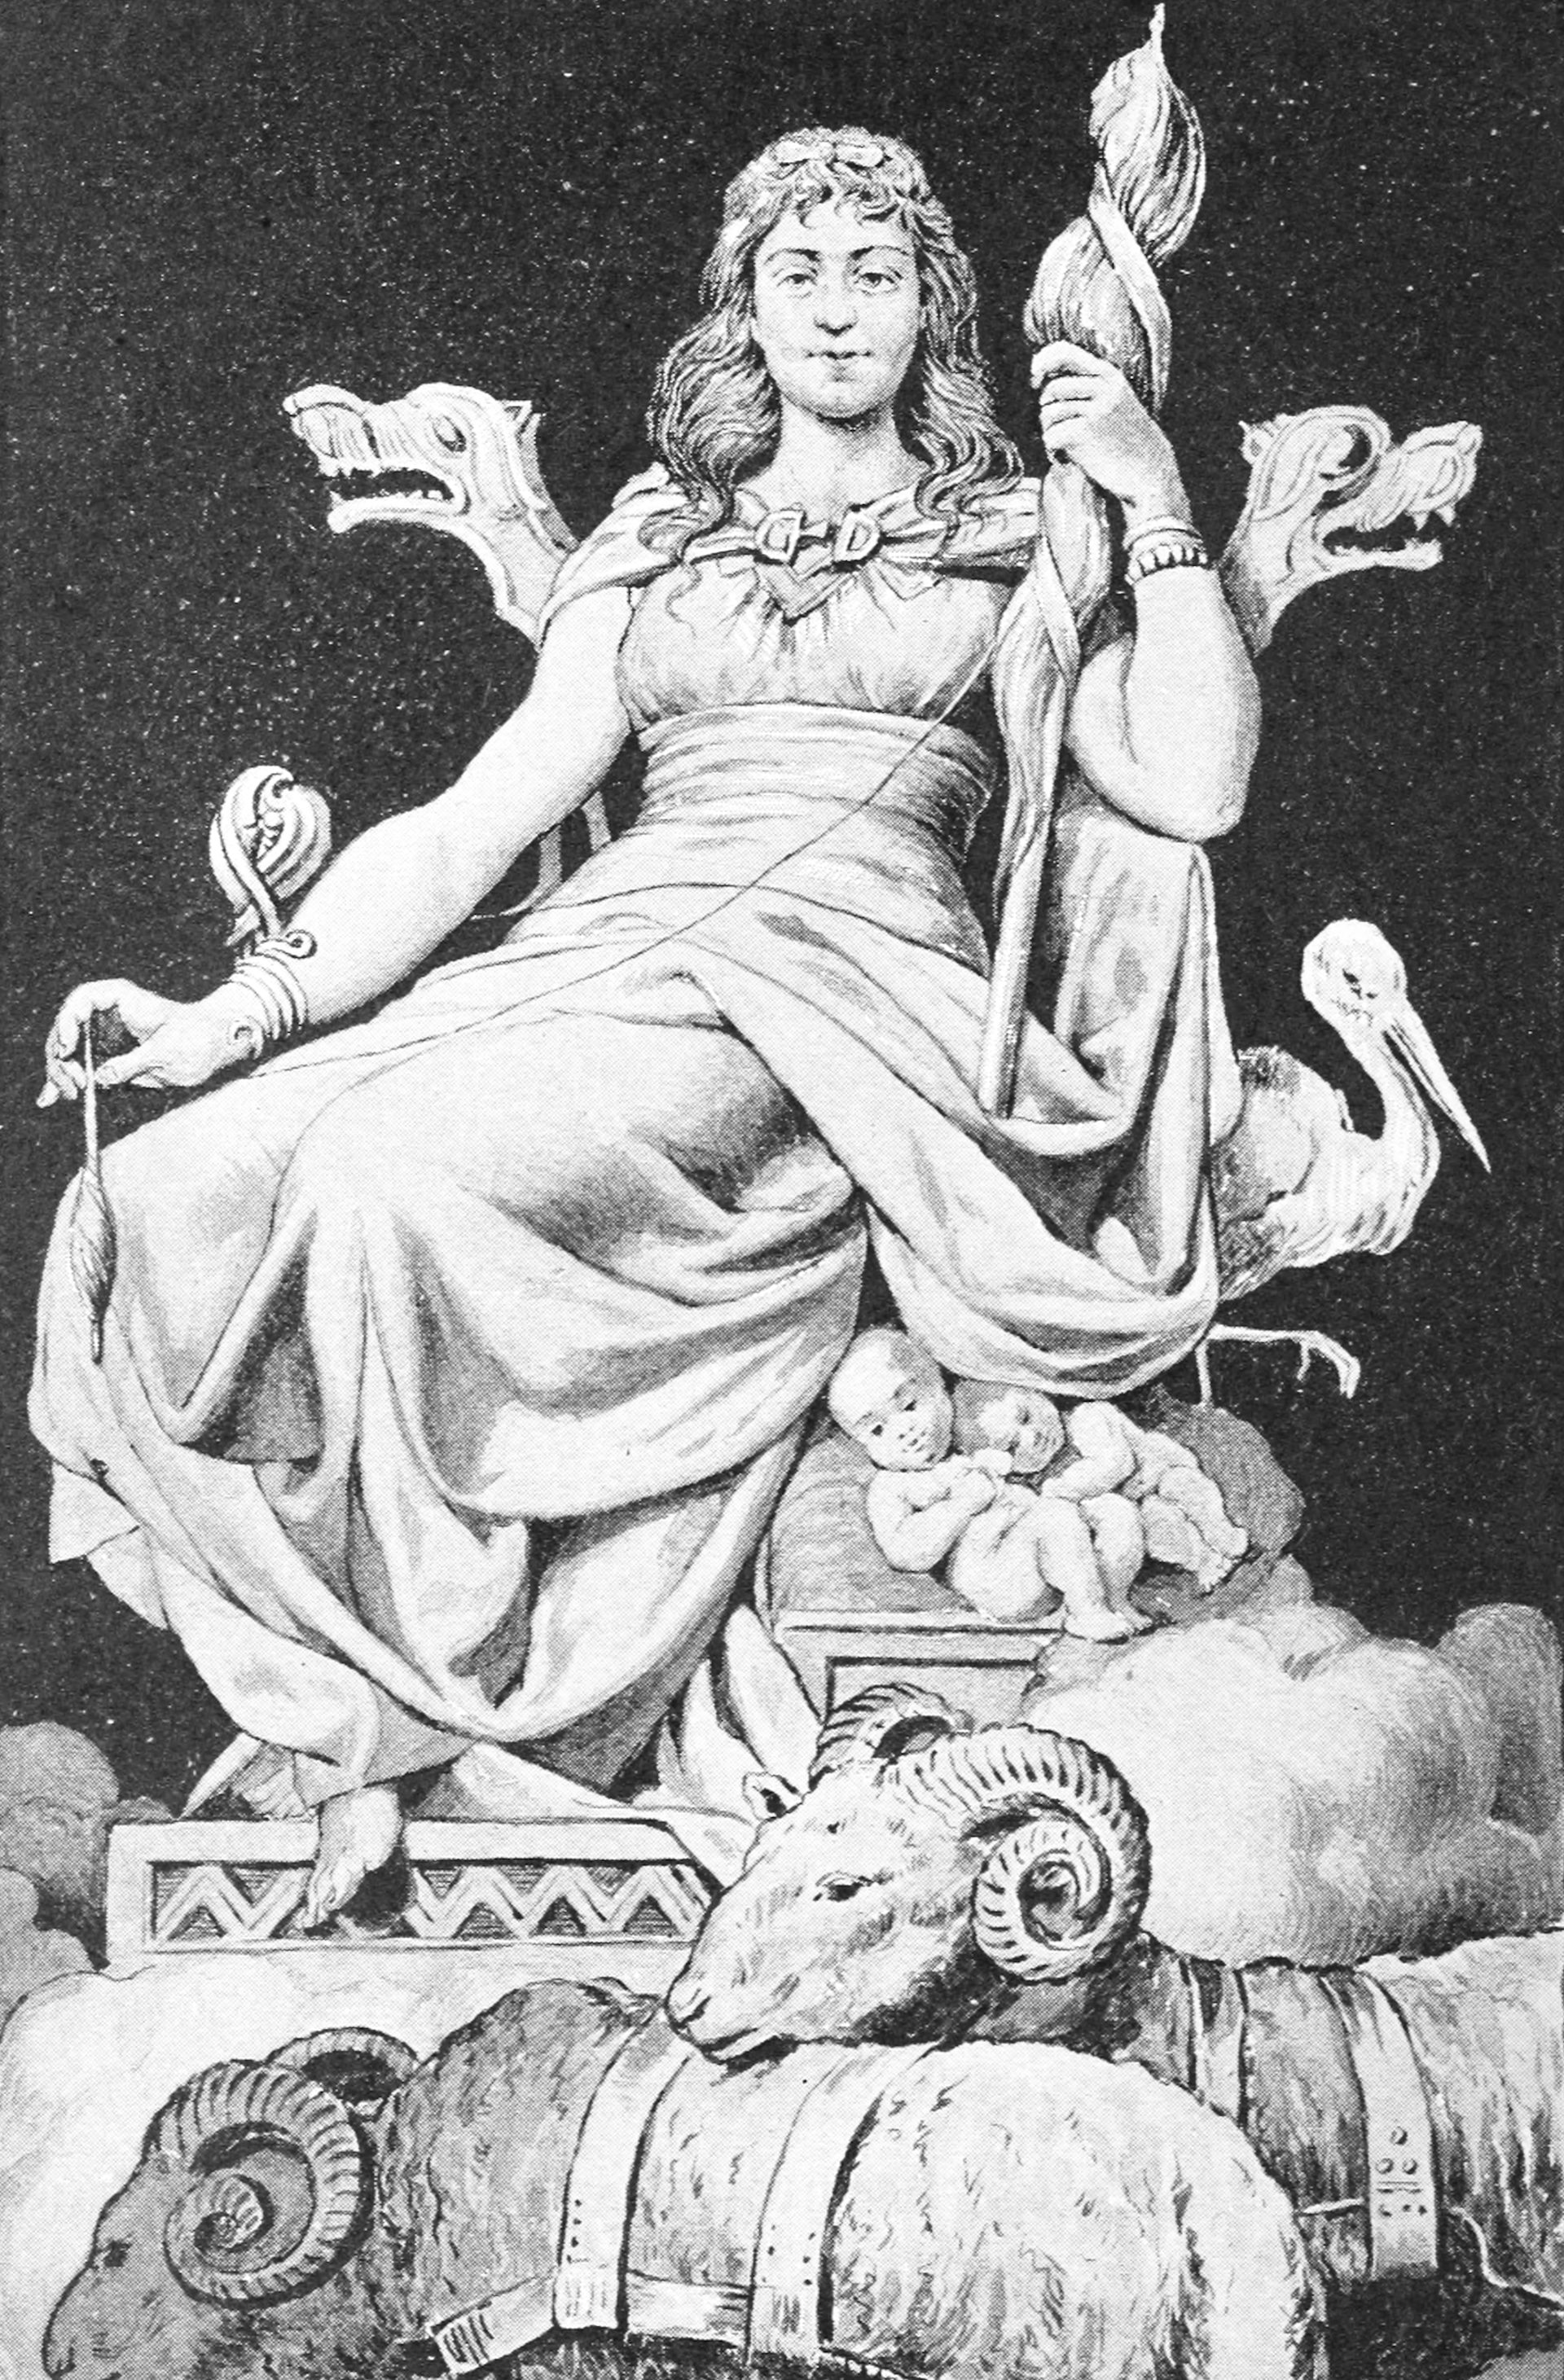 The Berserker - Frigg – The Queen of the Aesir Gods Possibly the